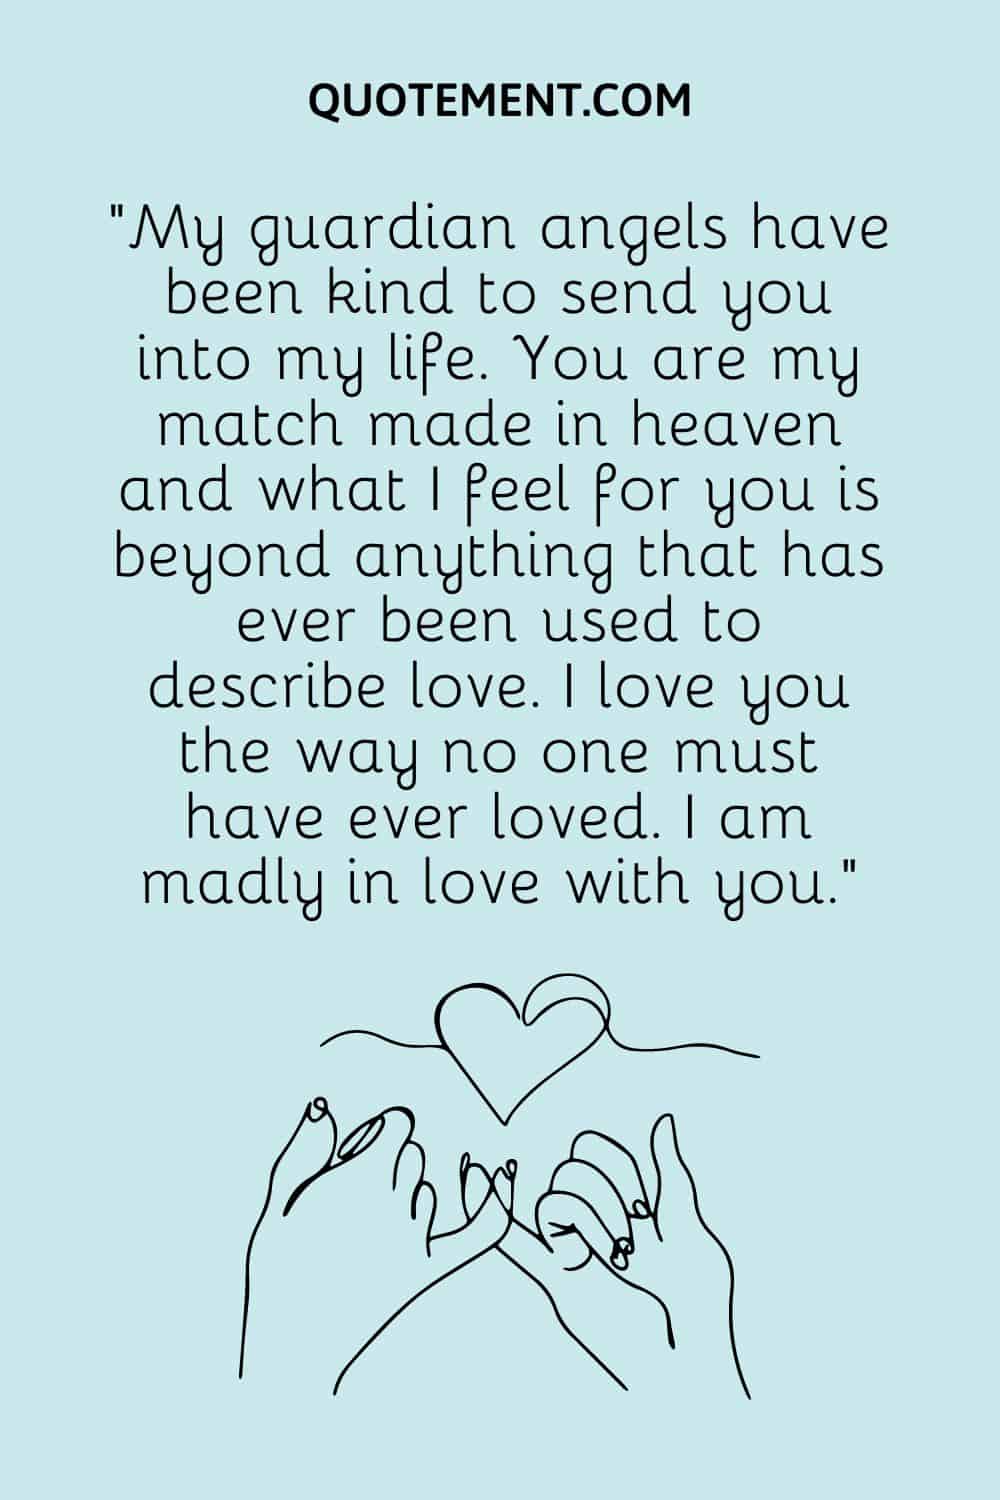 My guardian angels have been kind to send you into my life